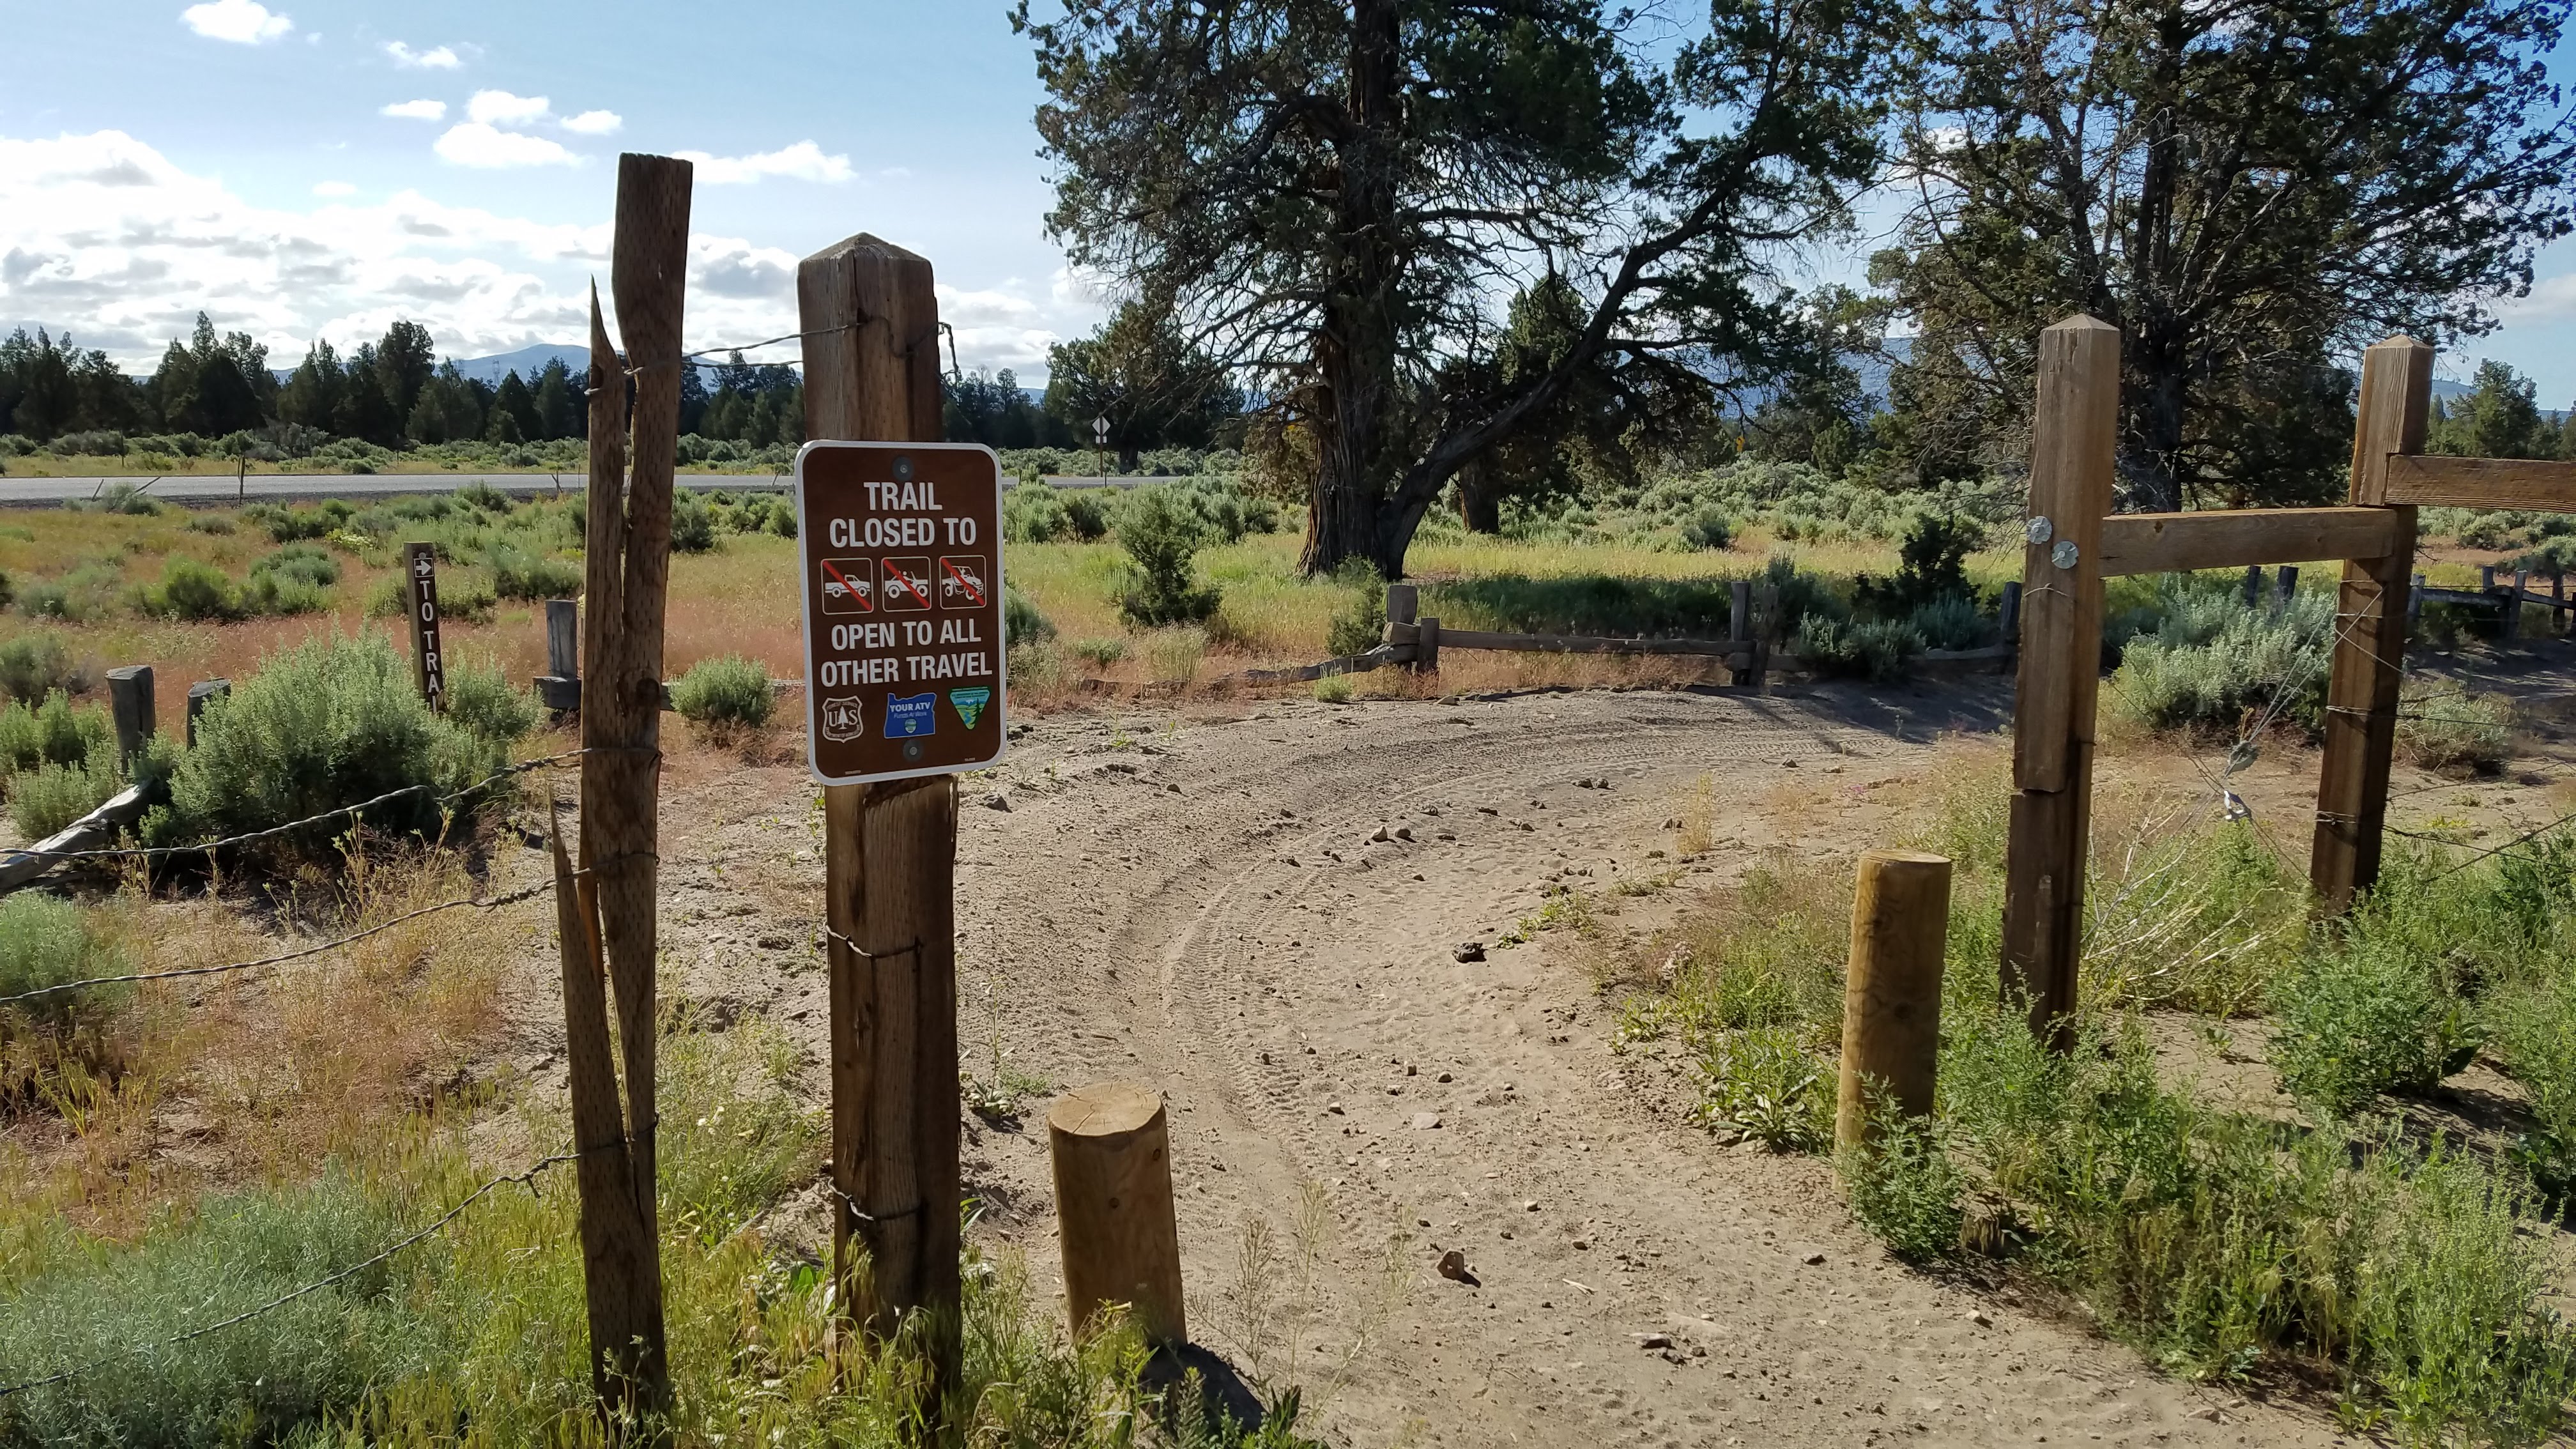 Trail access point at Alfalfa Curves OHV Staging Area